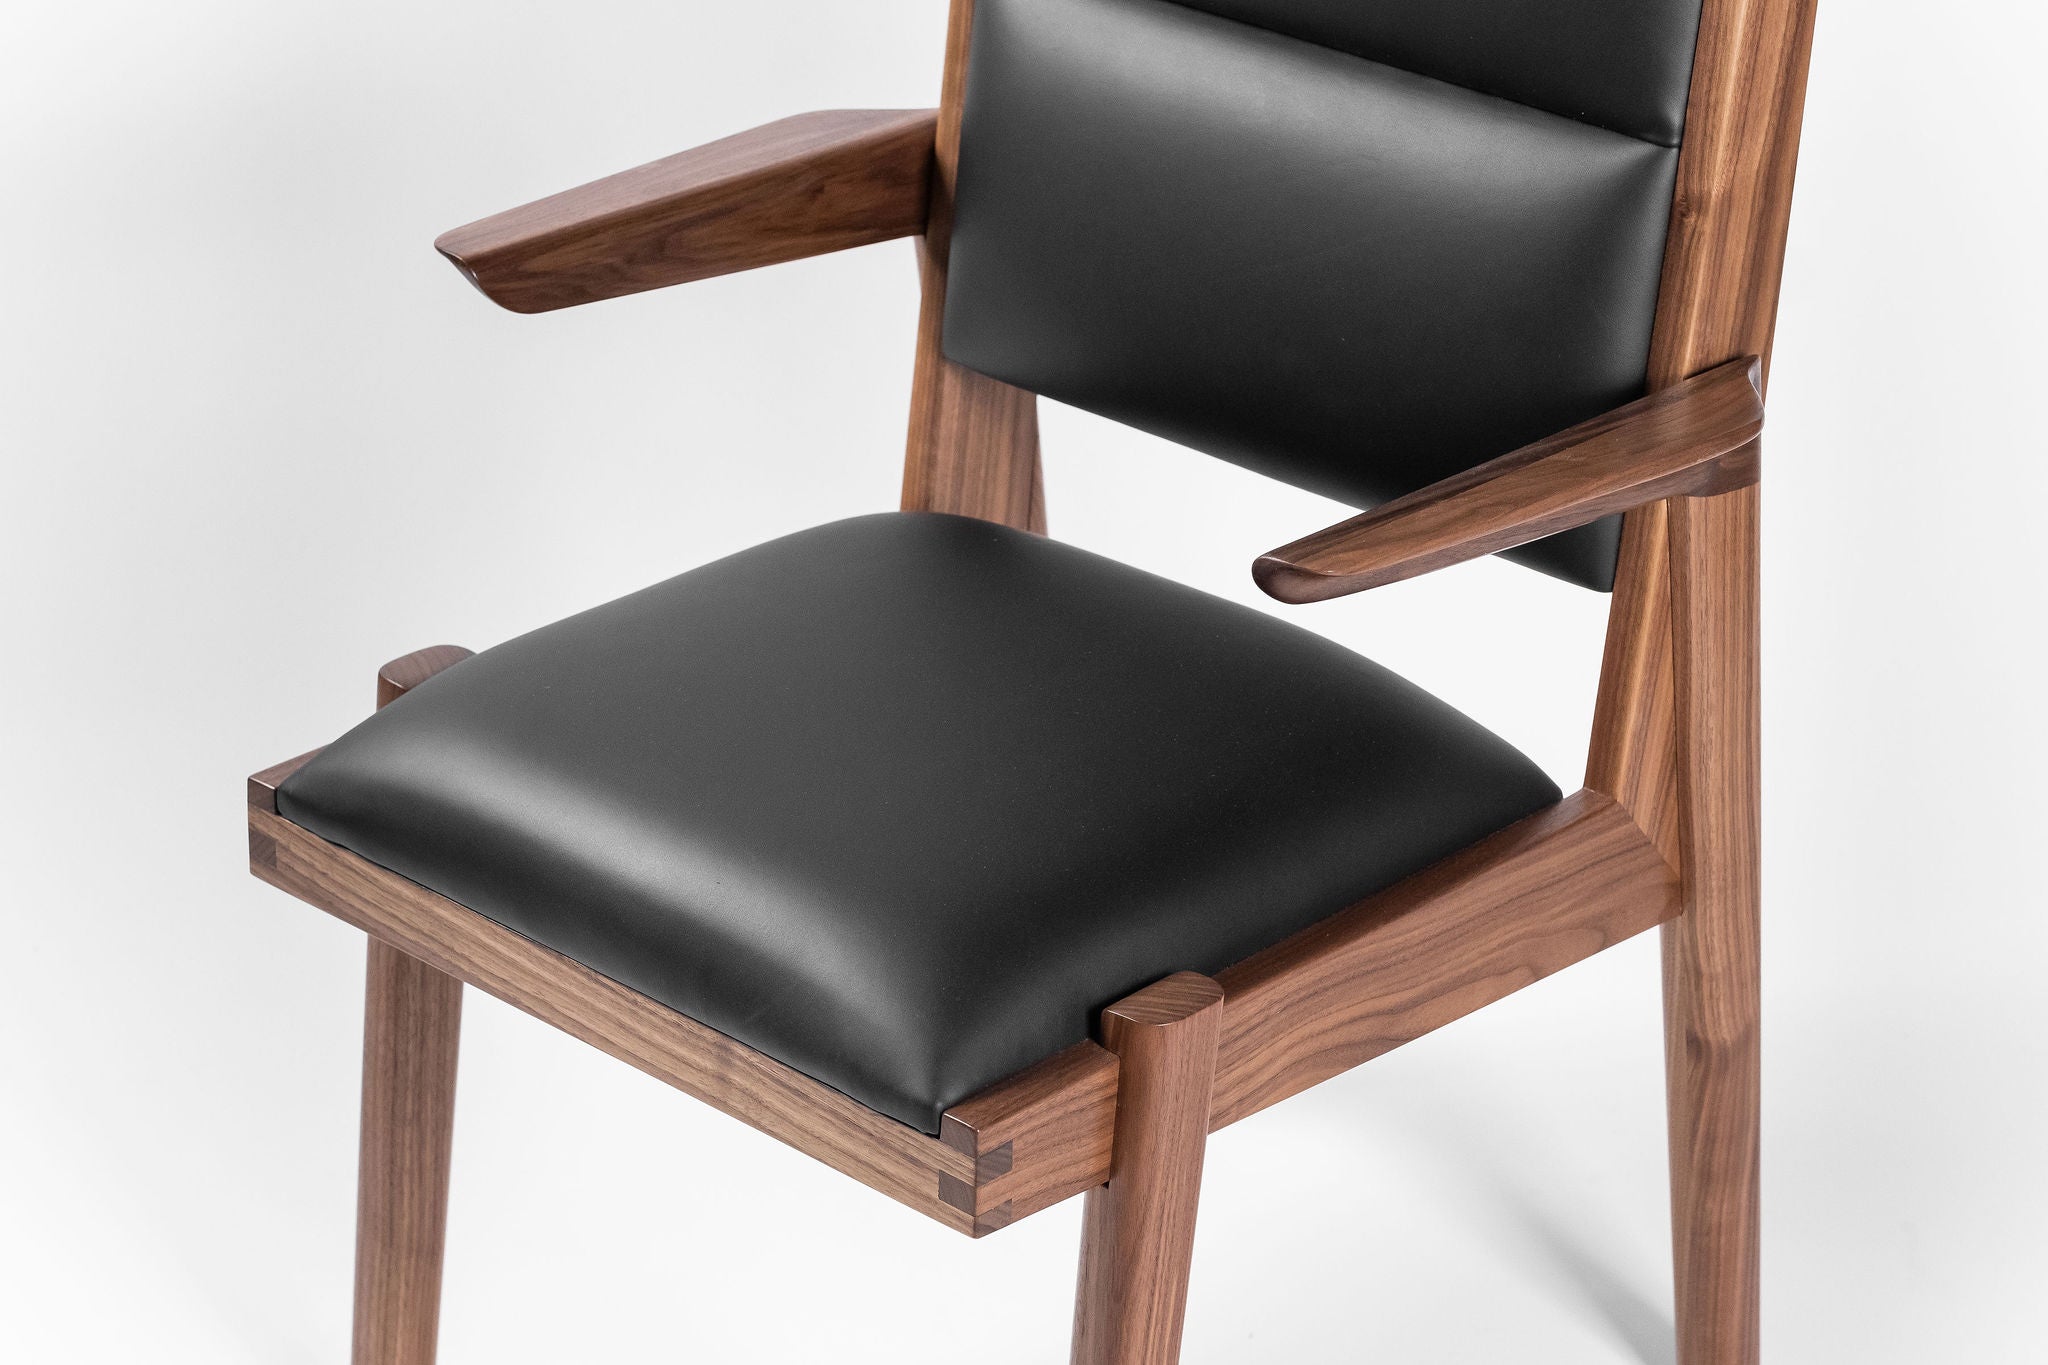 Franklin midcentury modern walnut wood black leather chair handcrafted by Hunt & Noyer in Michigan